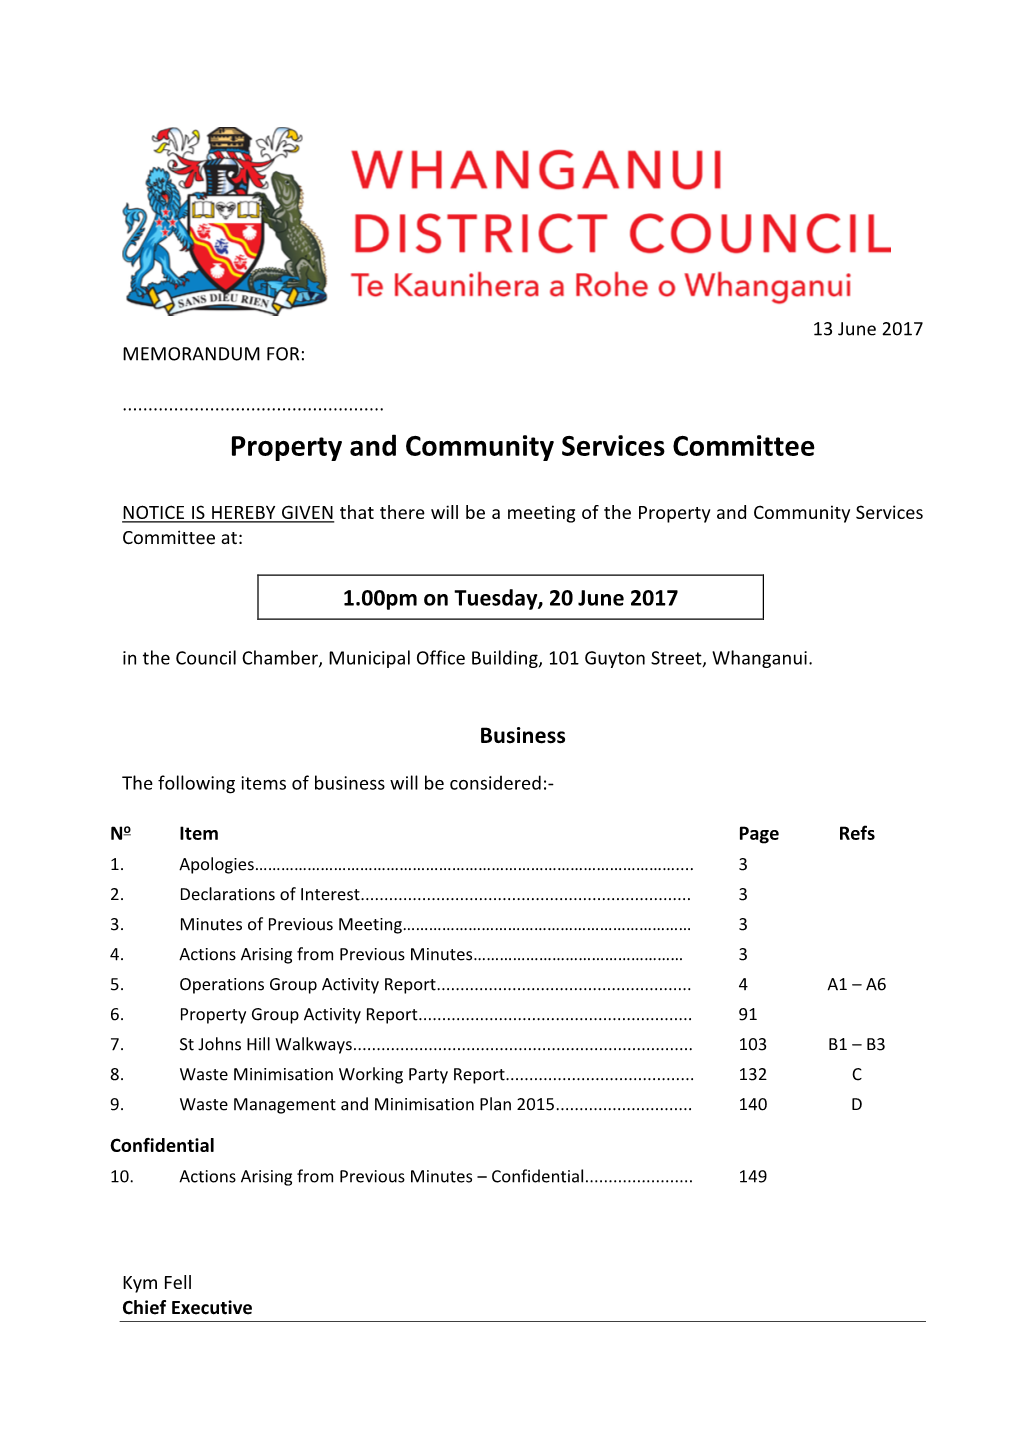 Property and Community Services Committee